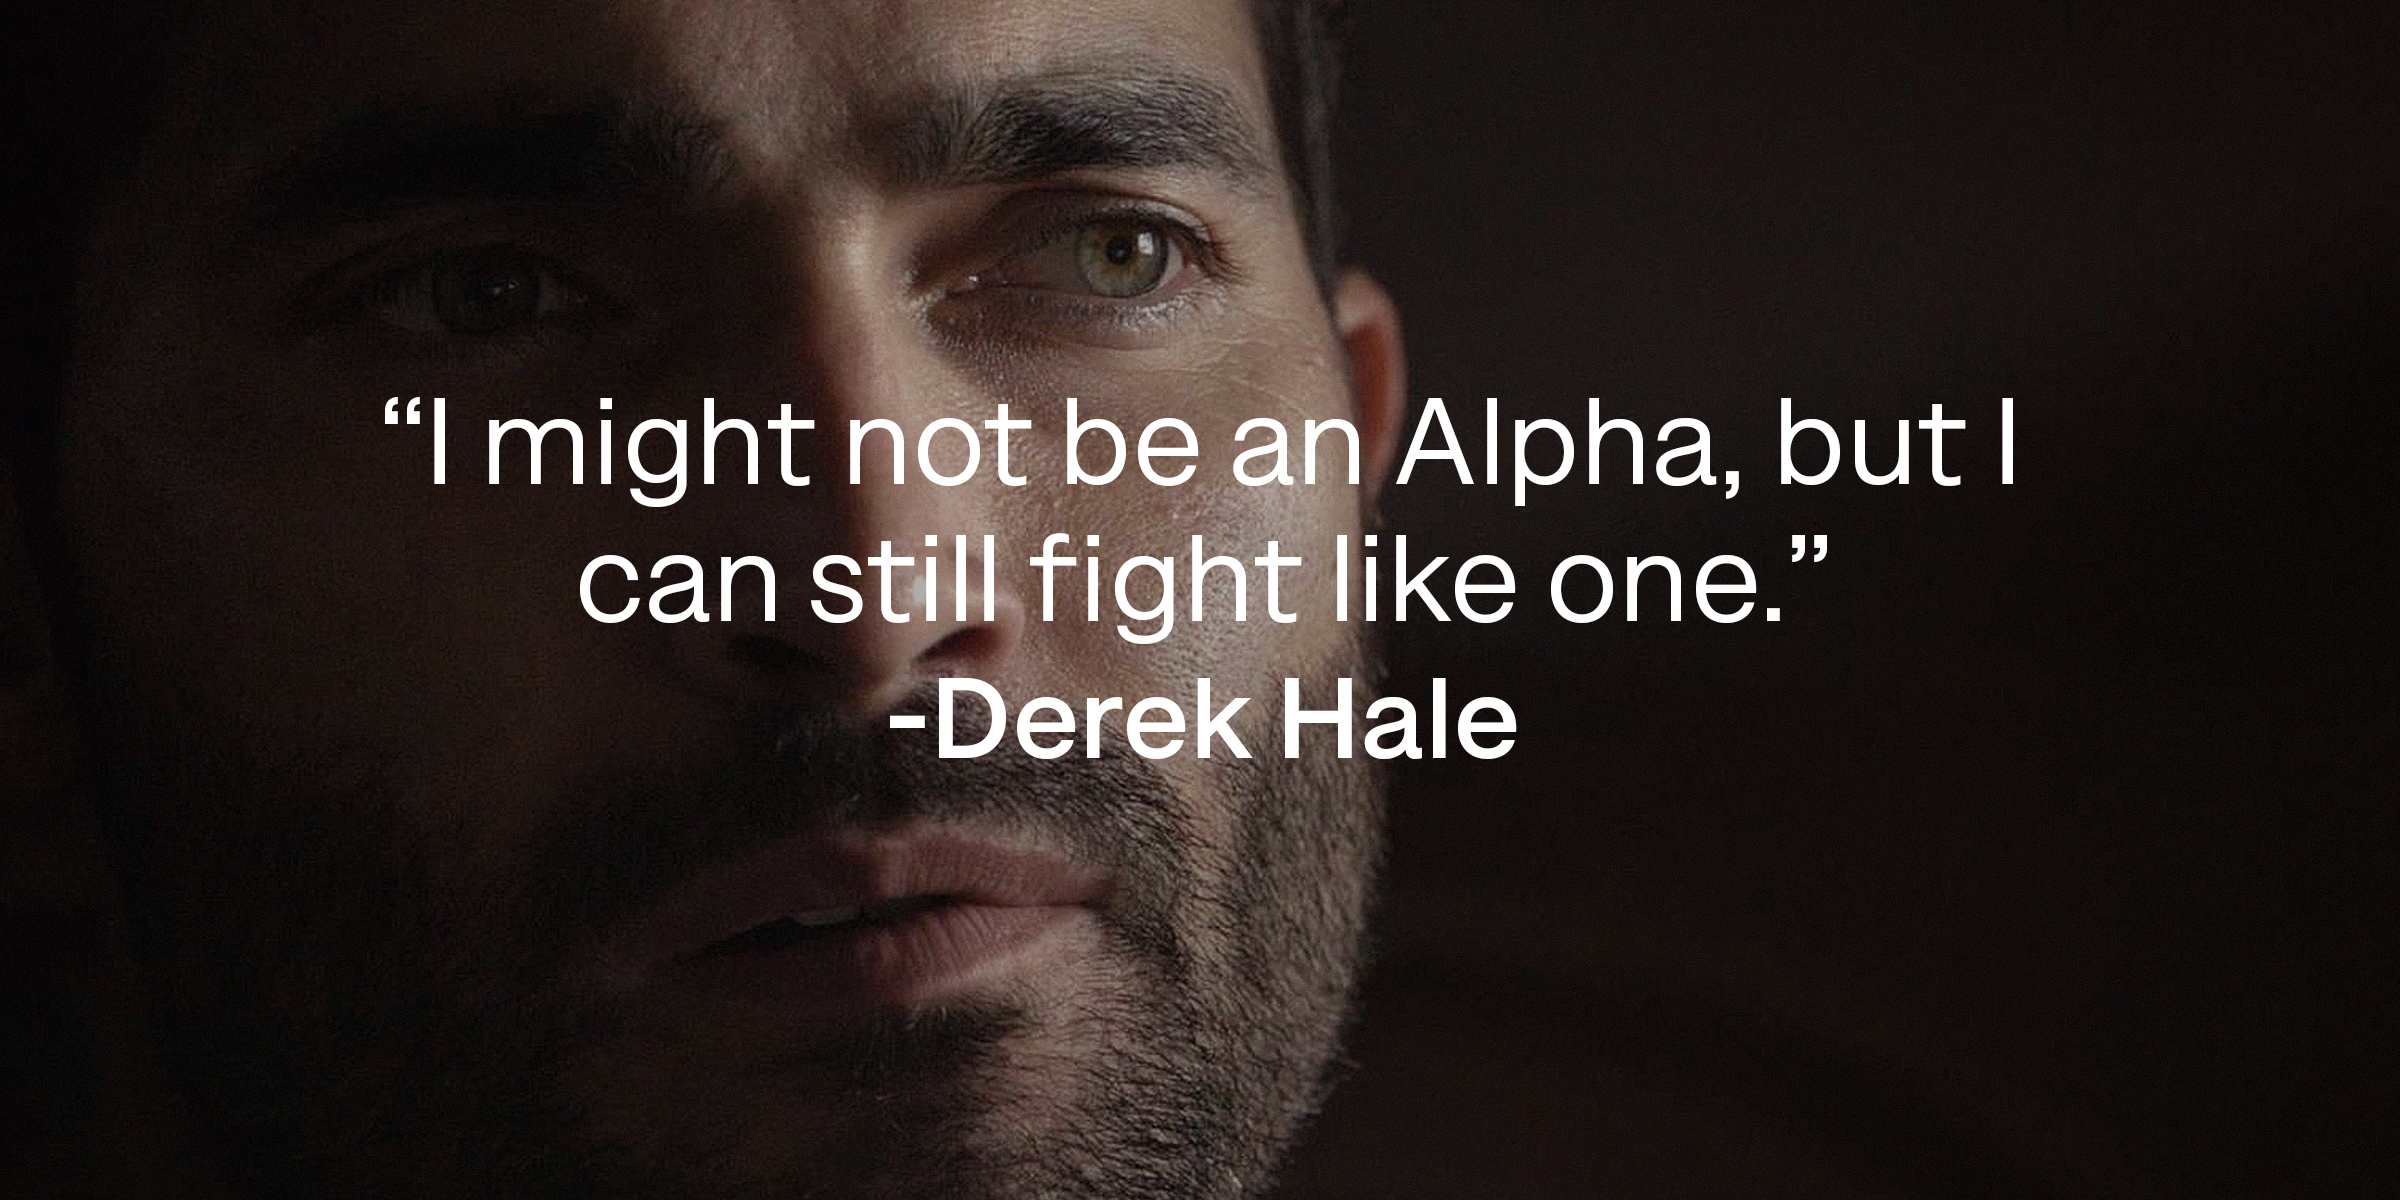 Derek Hale with his quote: "I might not be an Alpha, but I can still fight like one." | Source: facebook.com/TeenWolf